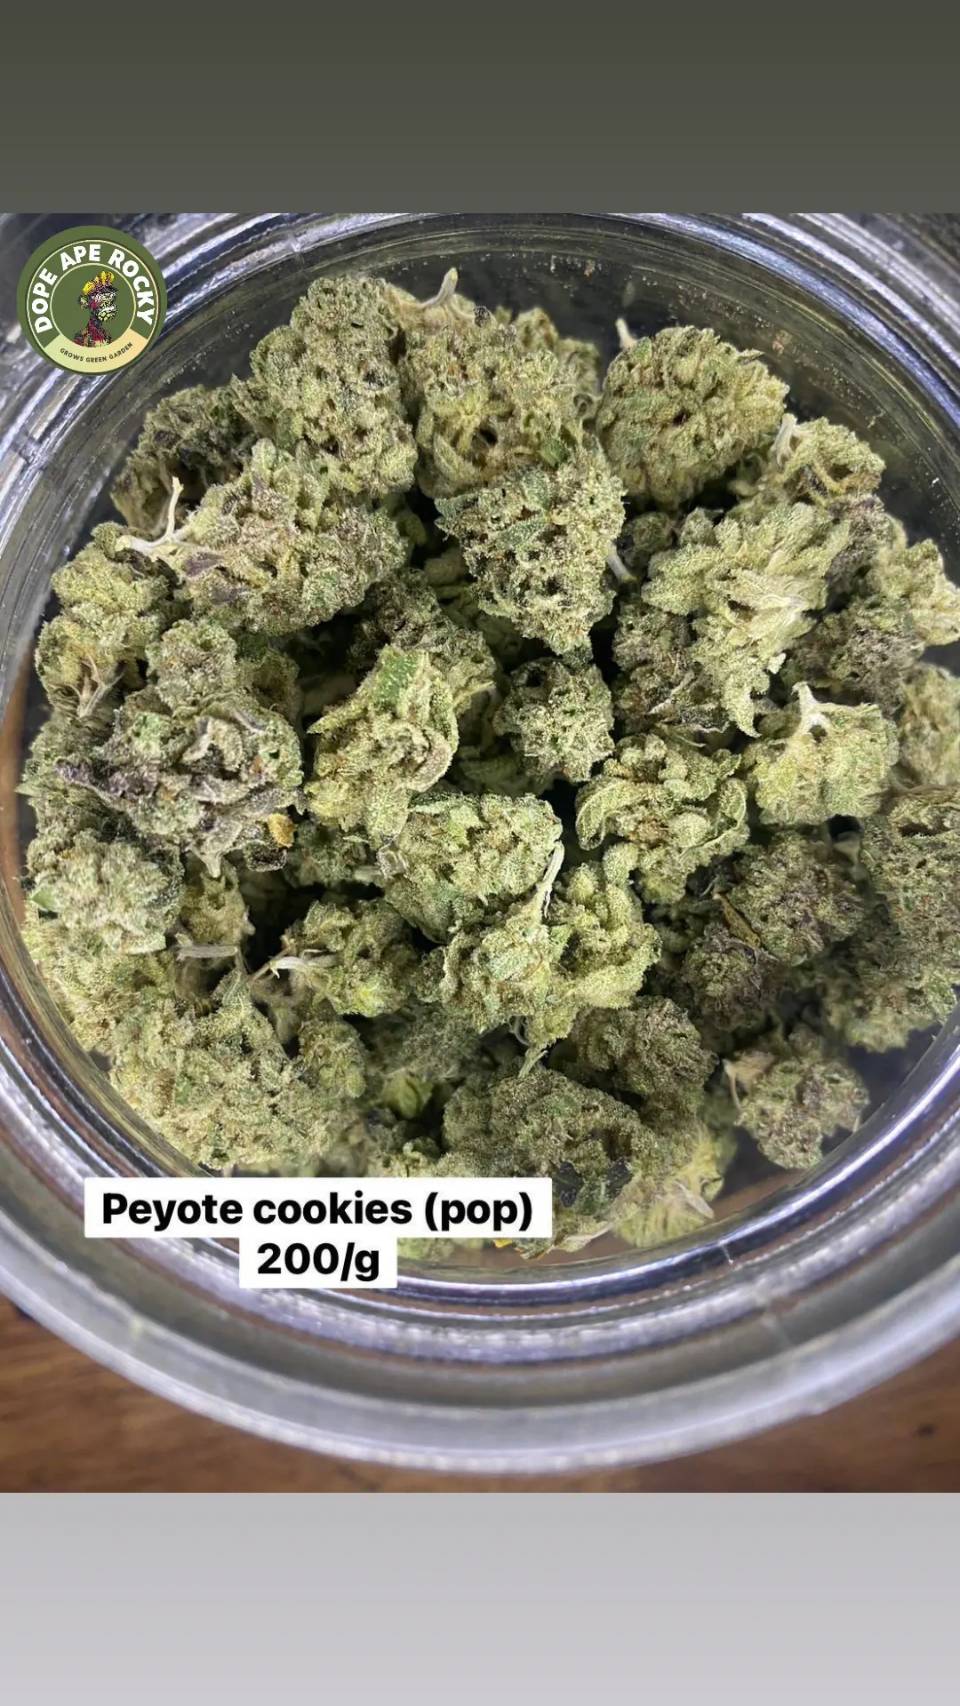 Product Image for Peyote Cookies(pop)